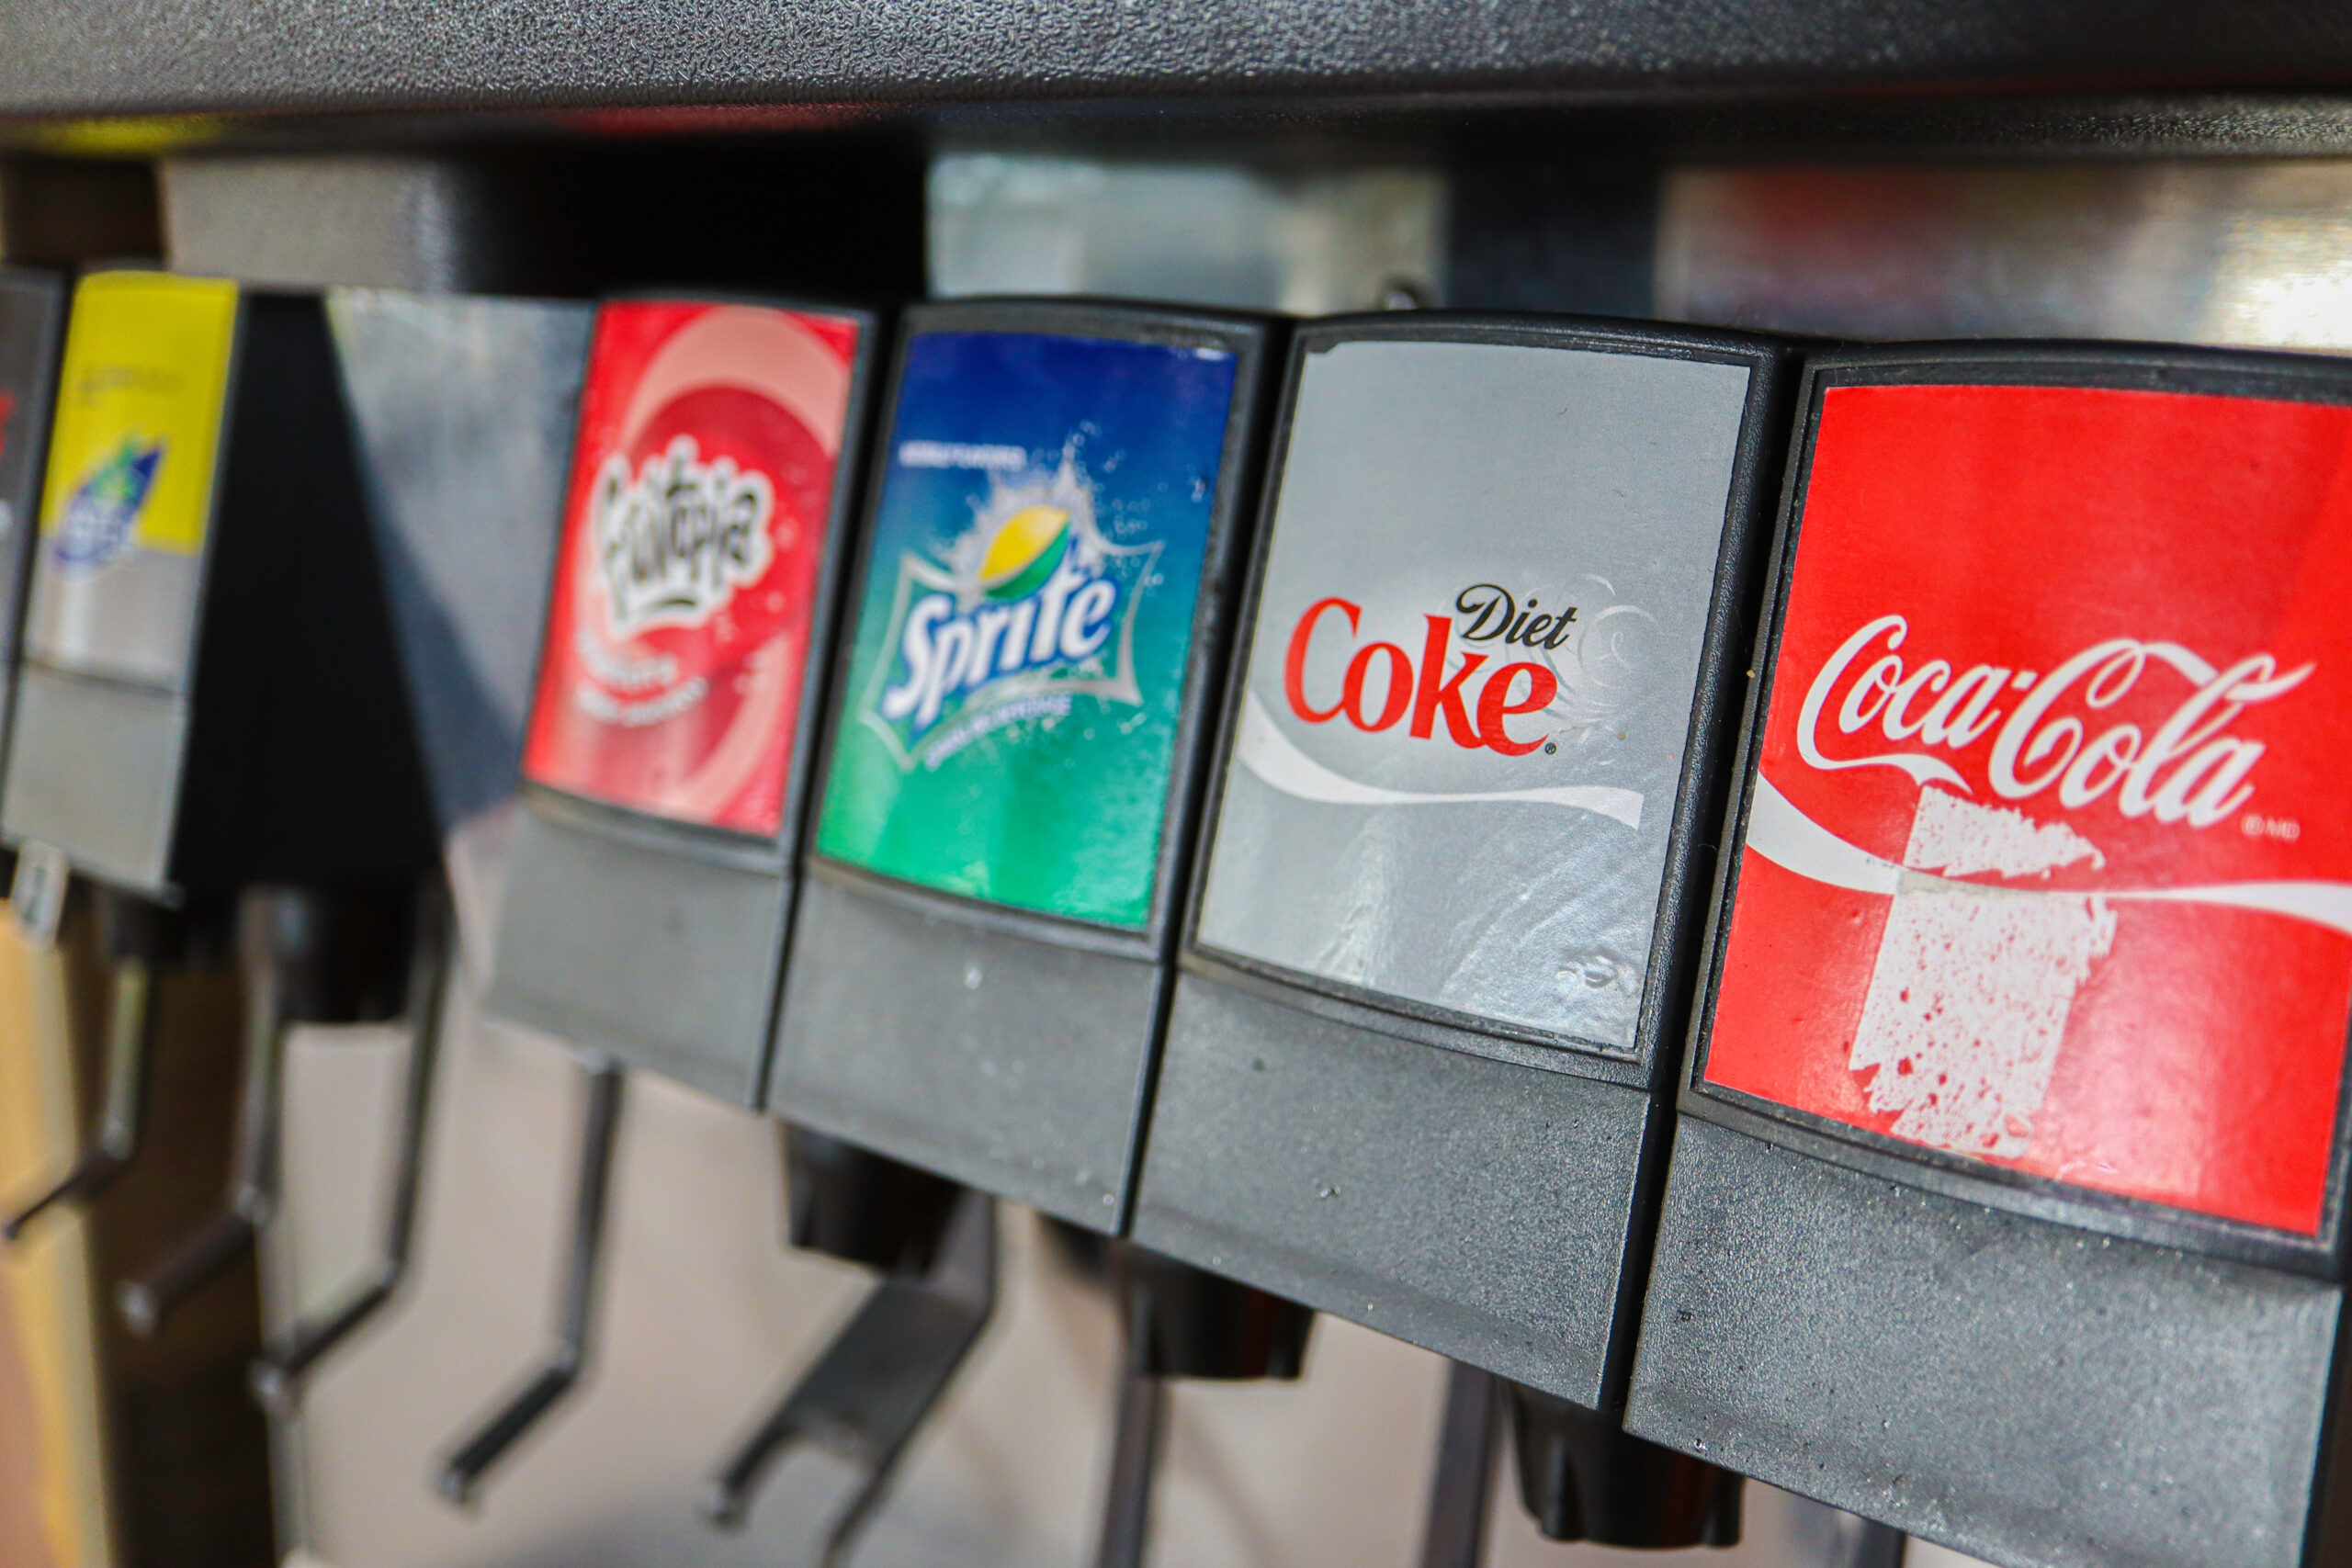 A photograph of a soda fountain focused on the brand names: Coca-Cola, Diet Coke, etc.